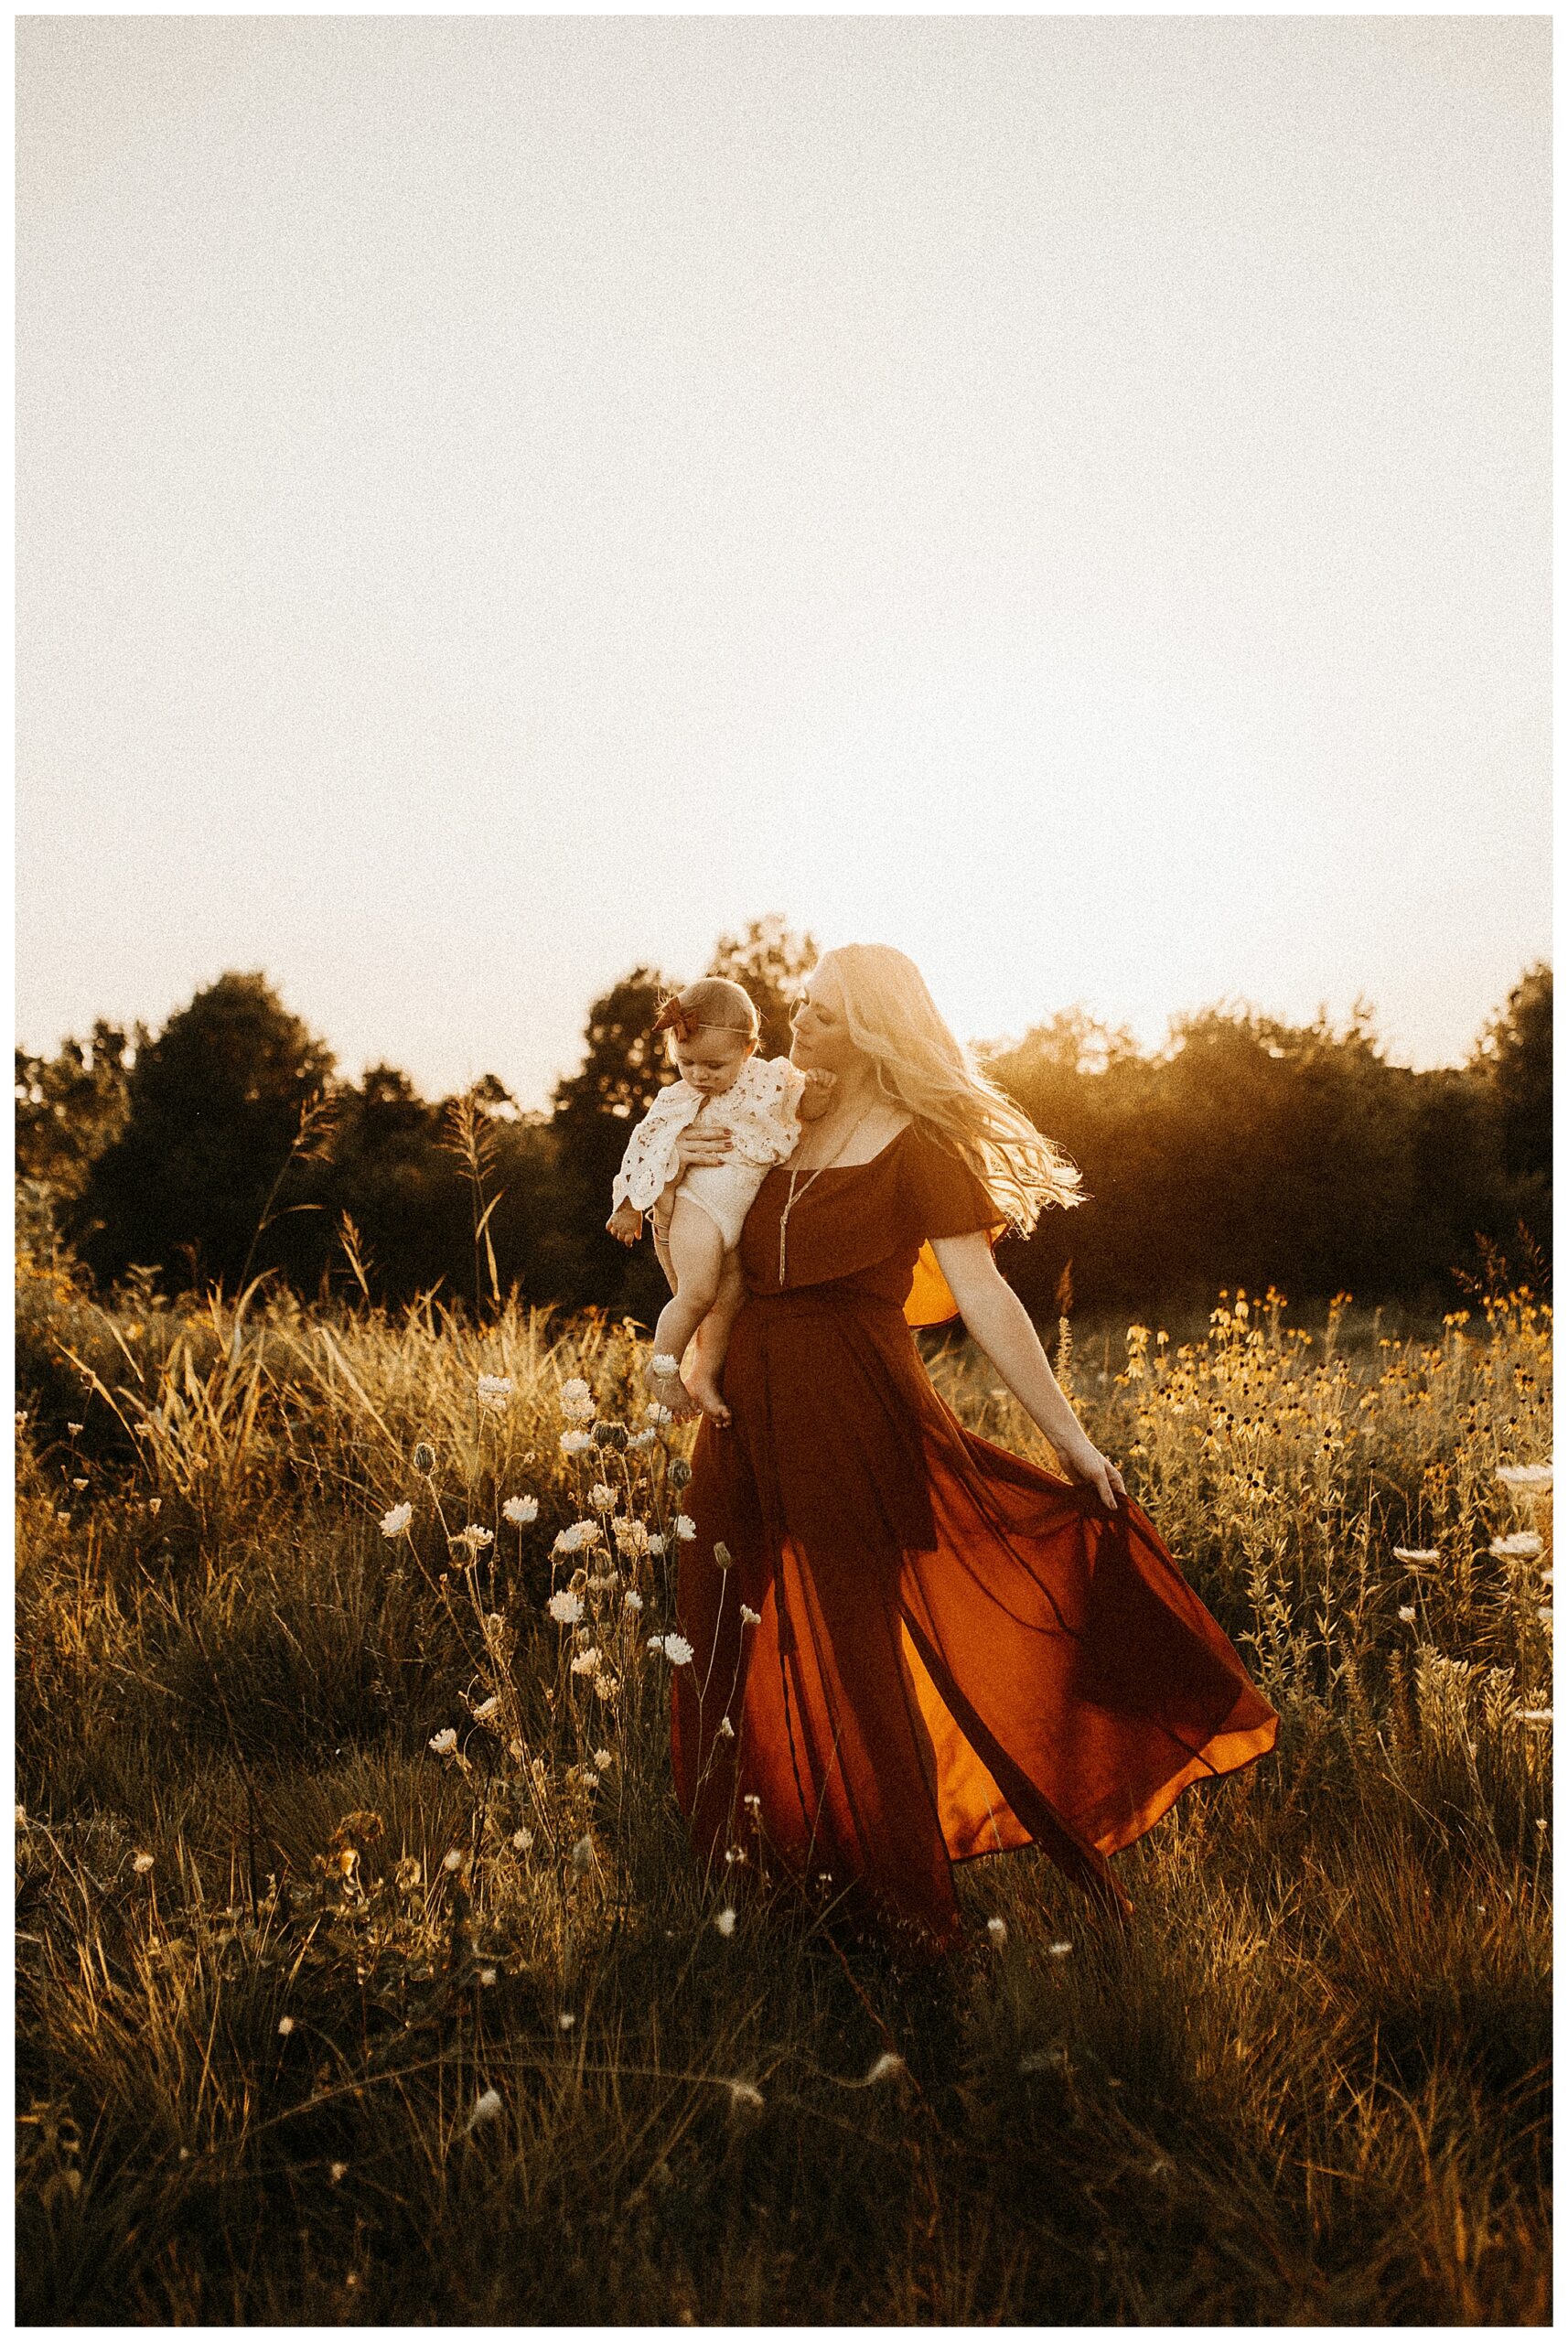 Mom dancing with baby daughter in orange Baltic Born dress at sunset family session in Wildflower Field O'fallon Missouri